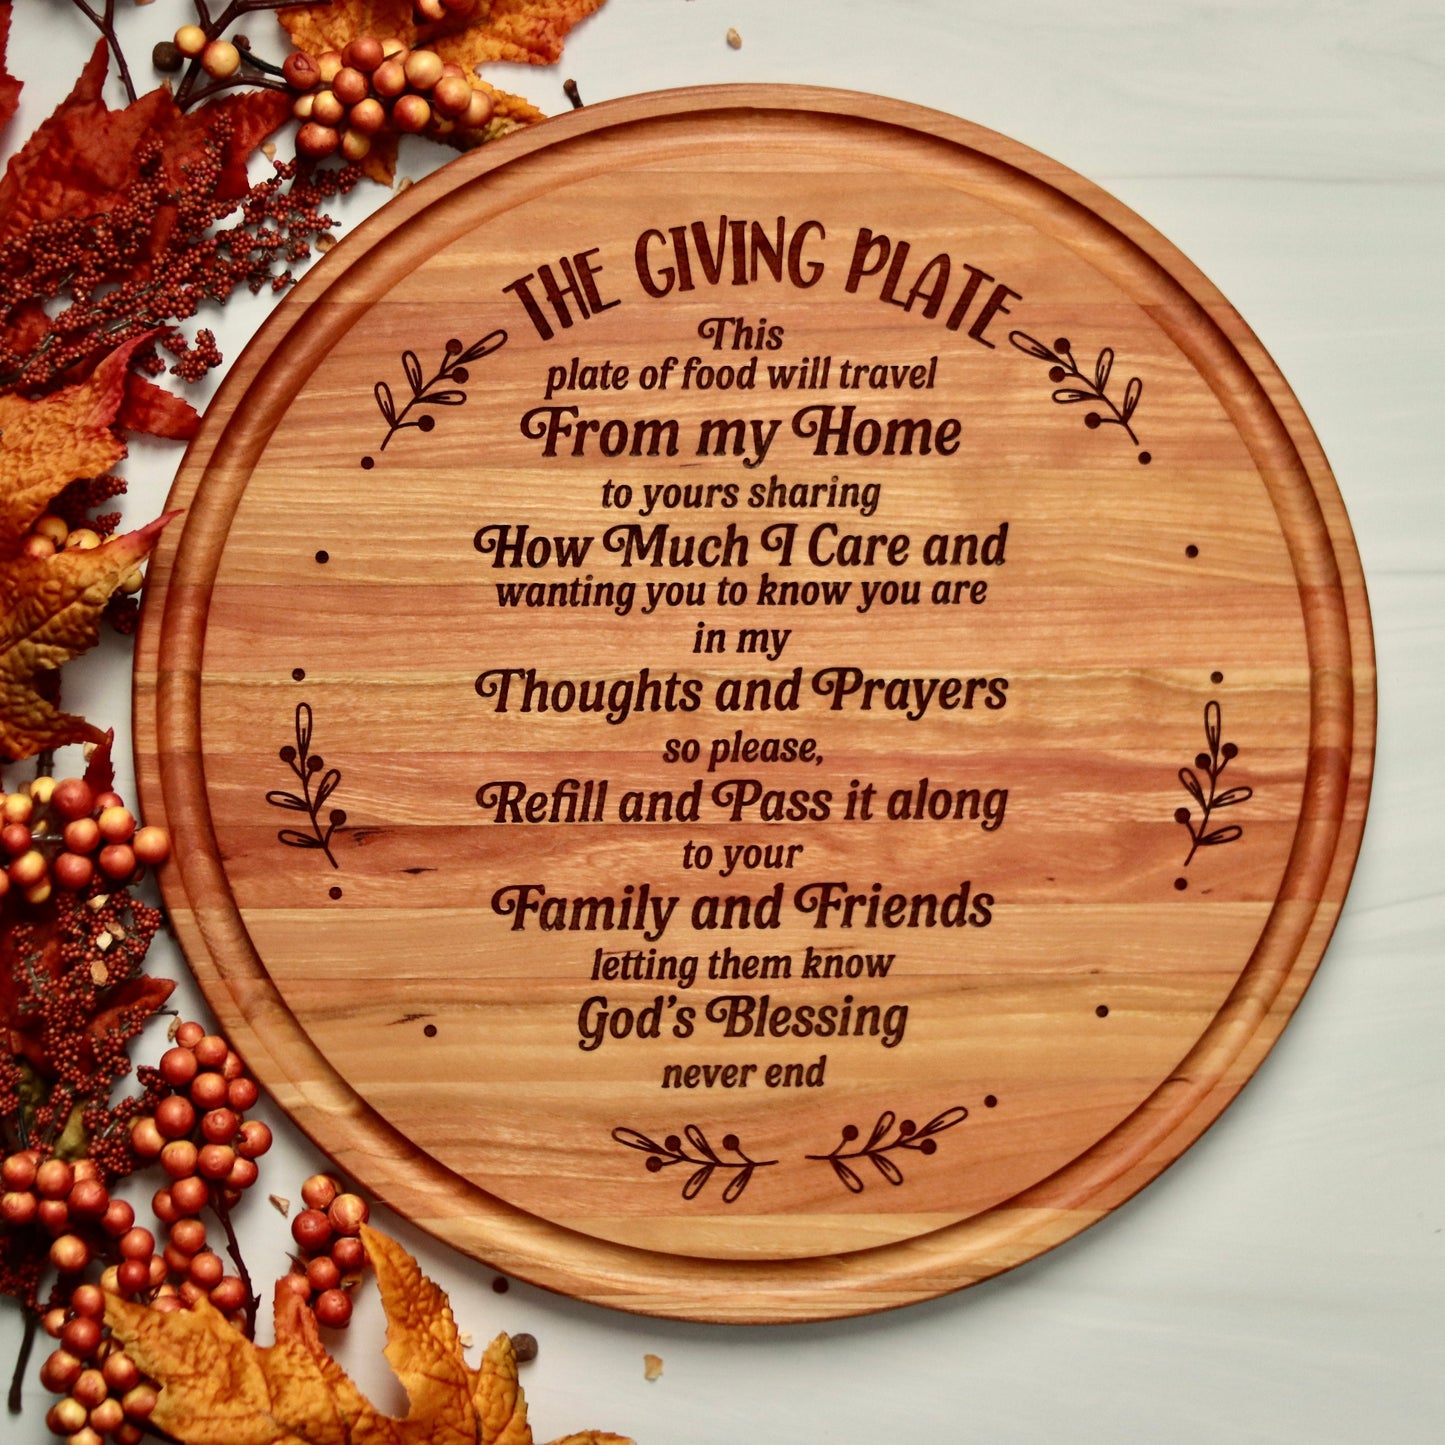 The Giving Plate, Circle of Giving, Holiday Gifting, Sharing Platter, Religious Gift,  Bakers Present, Thanksgiving, Christmas, Hostess Gift